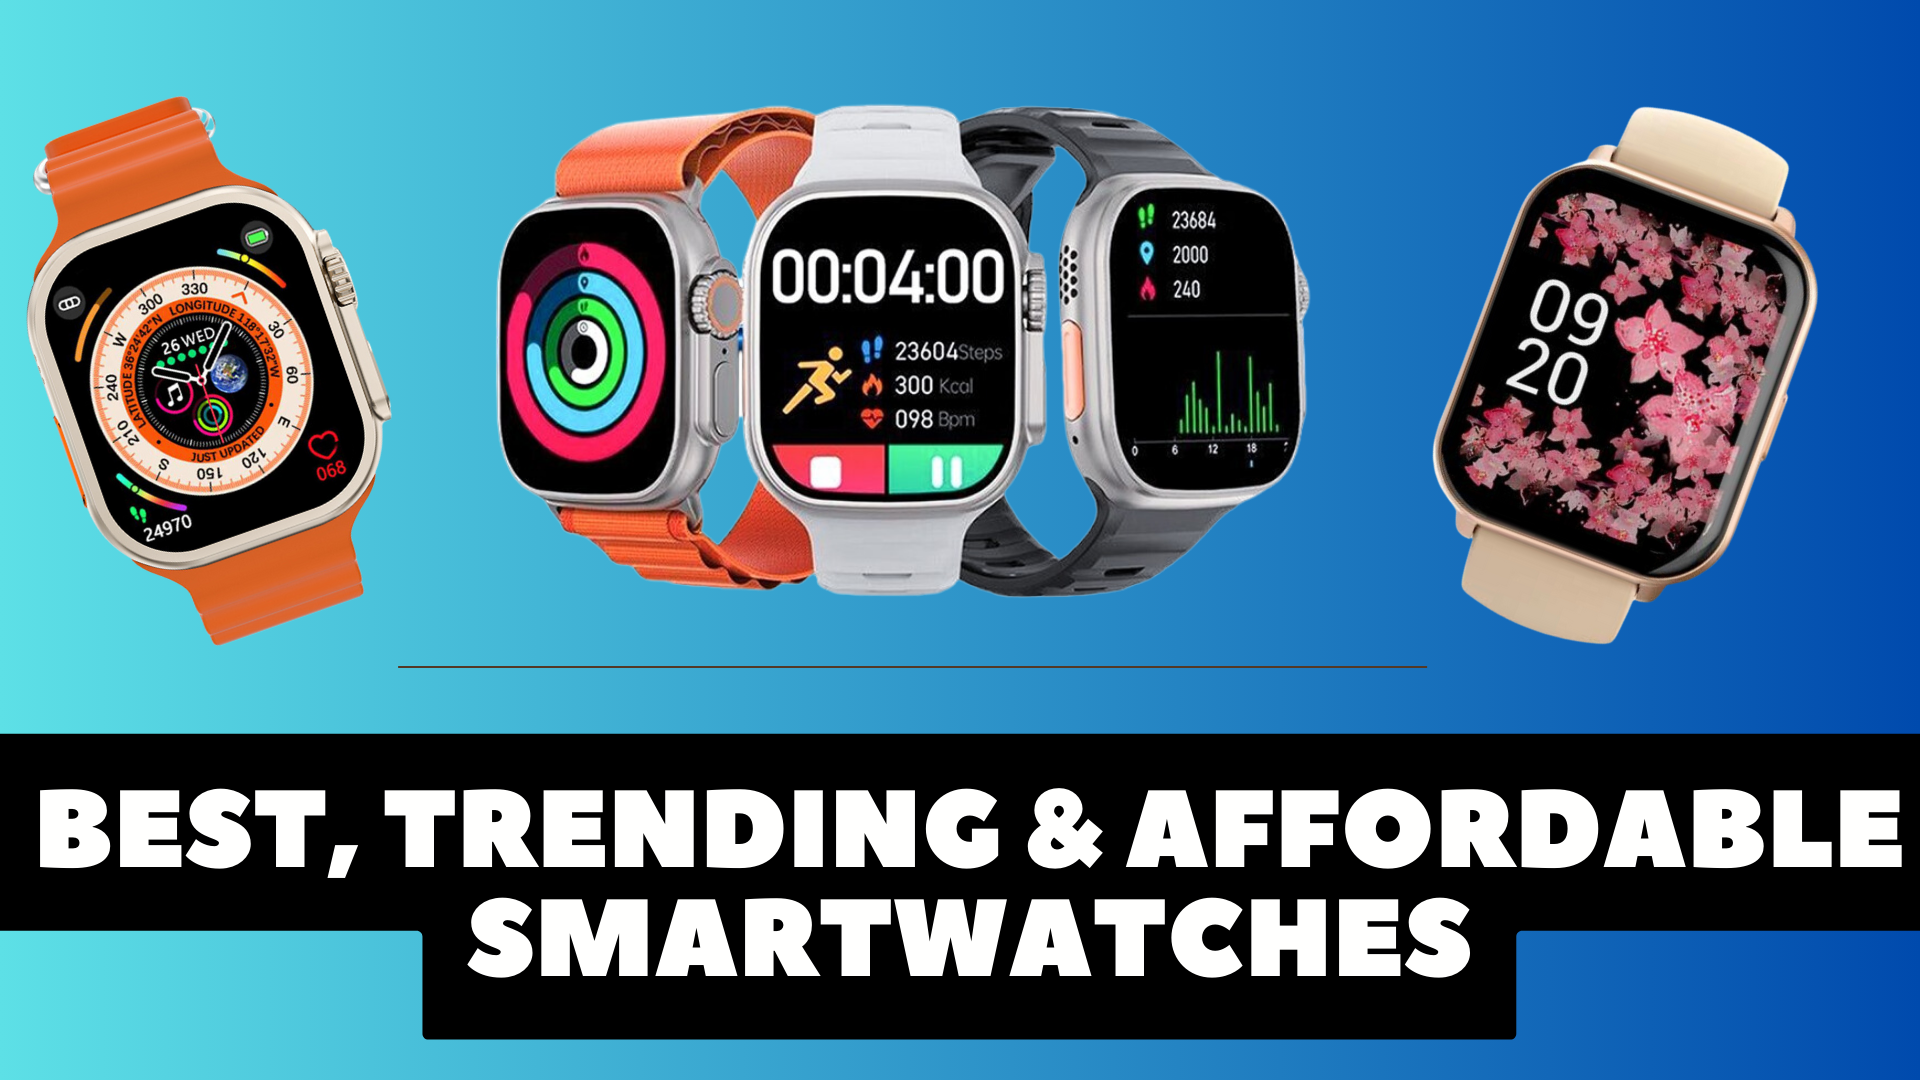 These are Affordable | Trending | Best smartwatches in Nepal